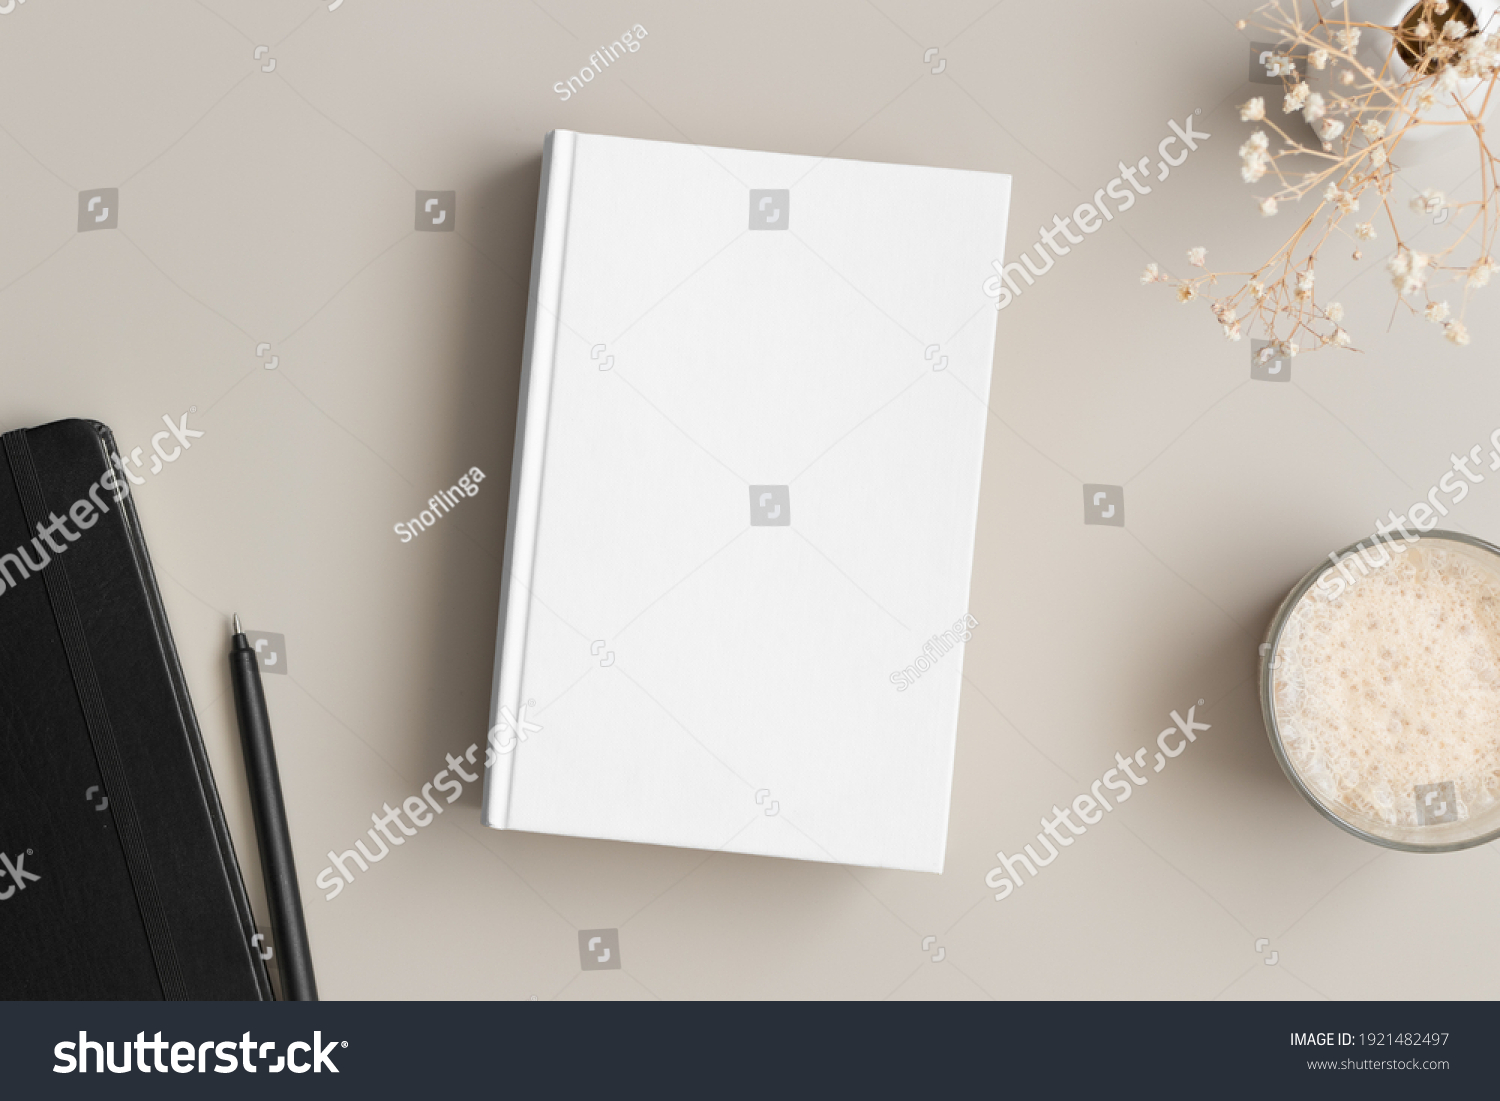 White book mockup with a gypsophila, coffee and workspace accessories on a beige table. #1921482497